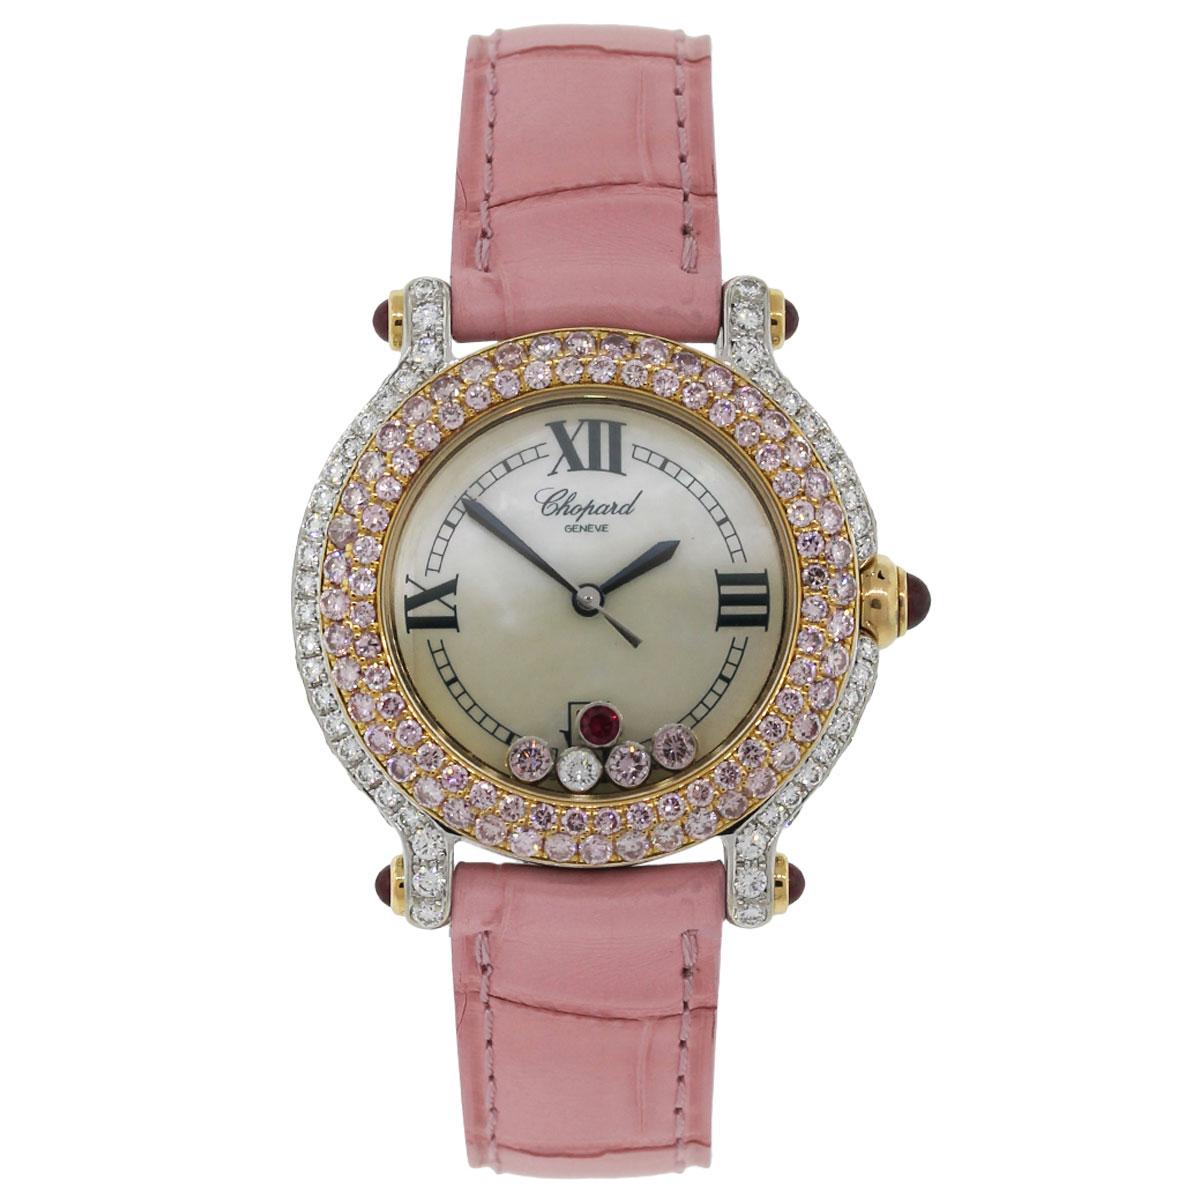 Brand: Chopard
MPN: 27/6180/401
Model: Happy Sport
Case Material: 18k white gold with white round brilliant diamonds
Case Diameter: 36mm
Crystal: Sapphire crystal
Bezel: 18k rose gold bezel with round brilliant pink diamonds
Dial: Mother of pearl